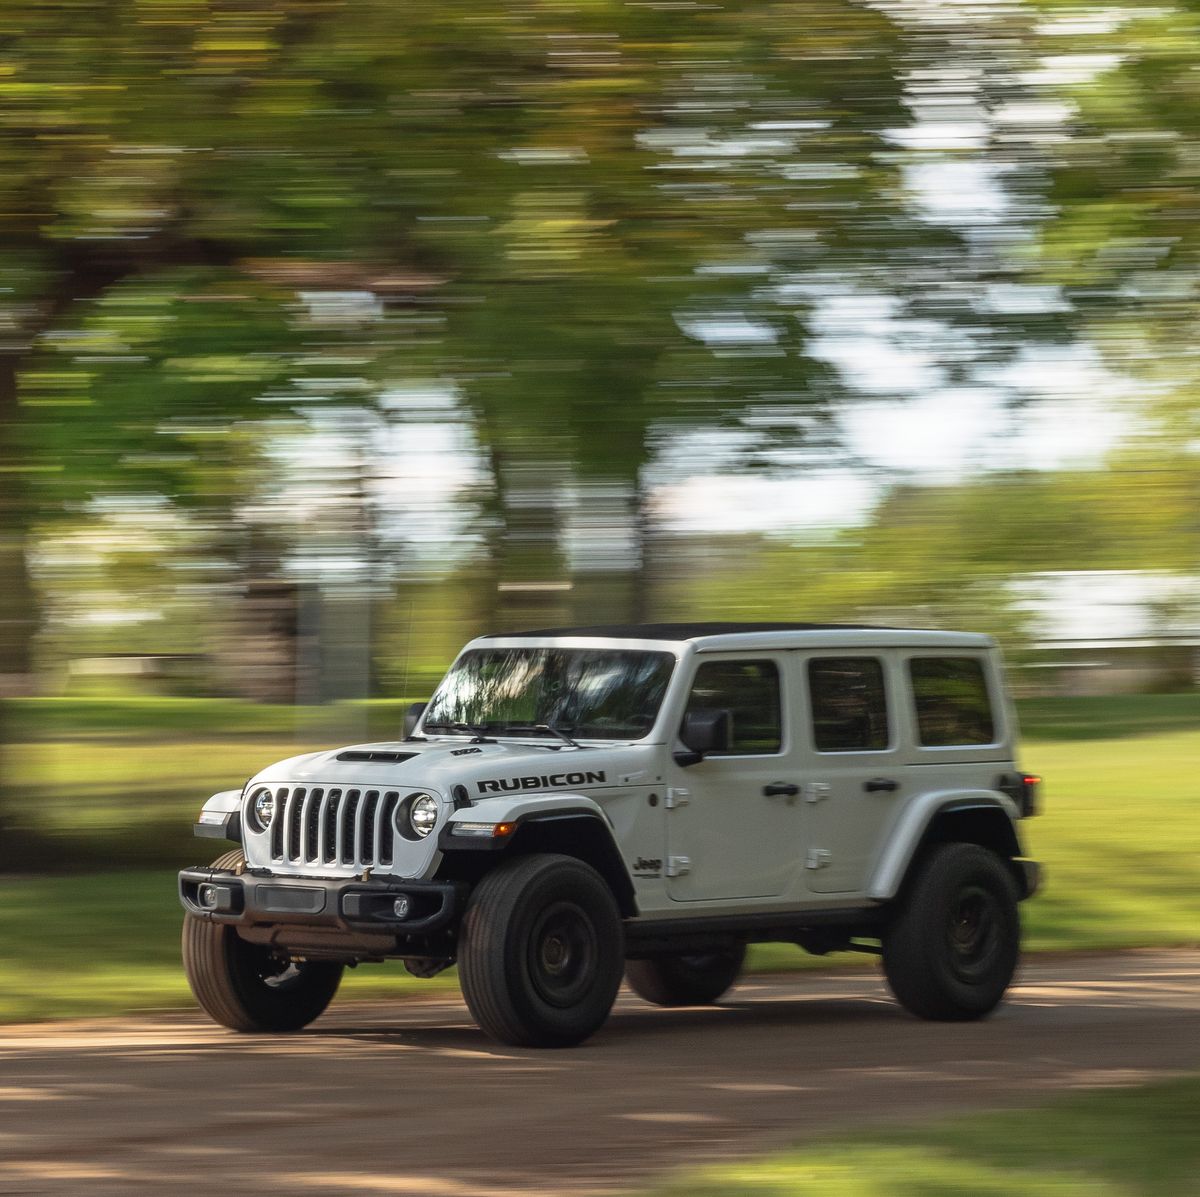 How Fast Does a Jeep Wrangler Go 